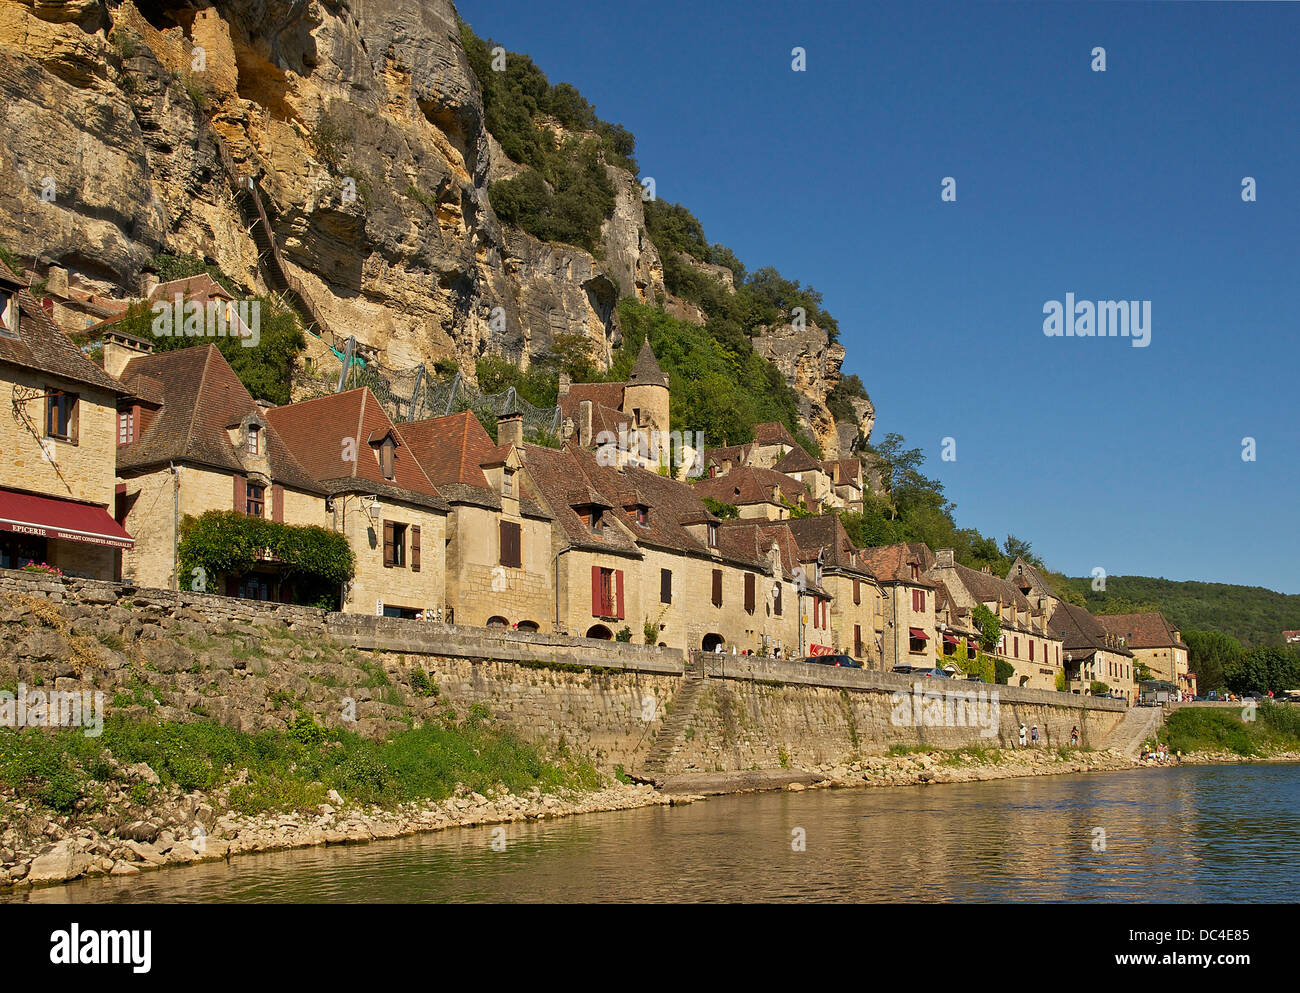 La Roque-Gageac is a small city in the Dordogne department of France. Perched above the Dordogne river, it is considered to be o Stock Photo